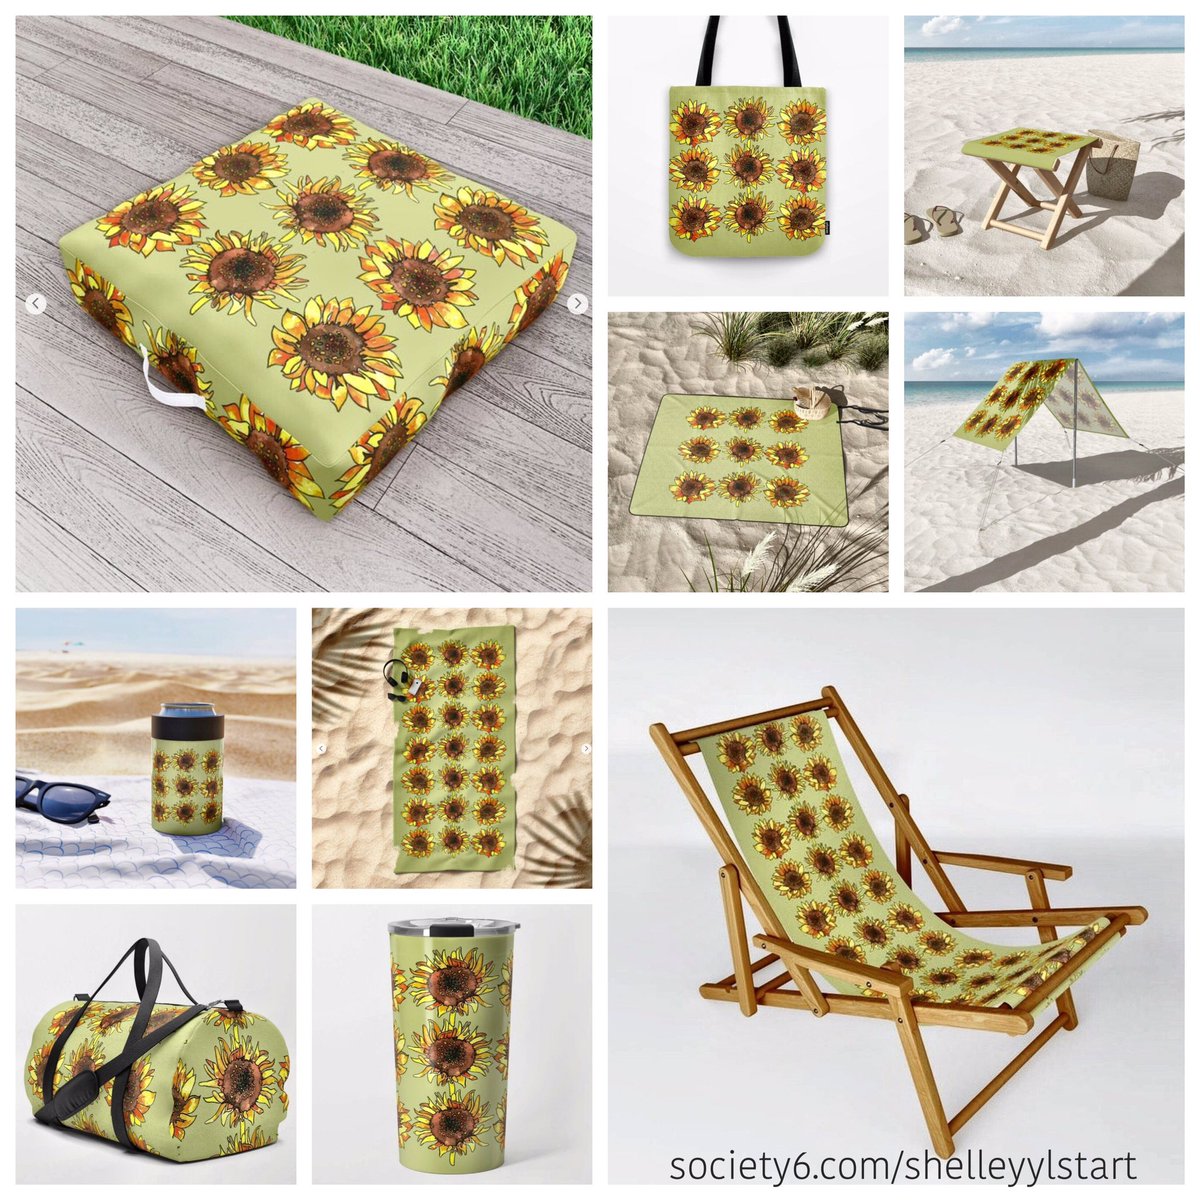 All the accessories you need to have some outdoor summer fun!
See Sunflowers here👉 bit.ly/2FlYyUb
society6.com/shelleyylstart
 #outdoorpillows #outdoorfurniture #outdoorliving #slingchair #foldingstool #picnicblanket #sunshades #cancooler #travelmug  #summer #summerliving